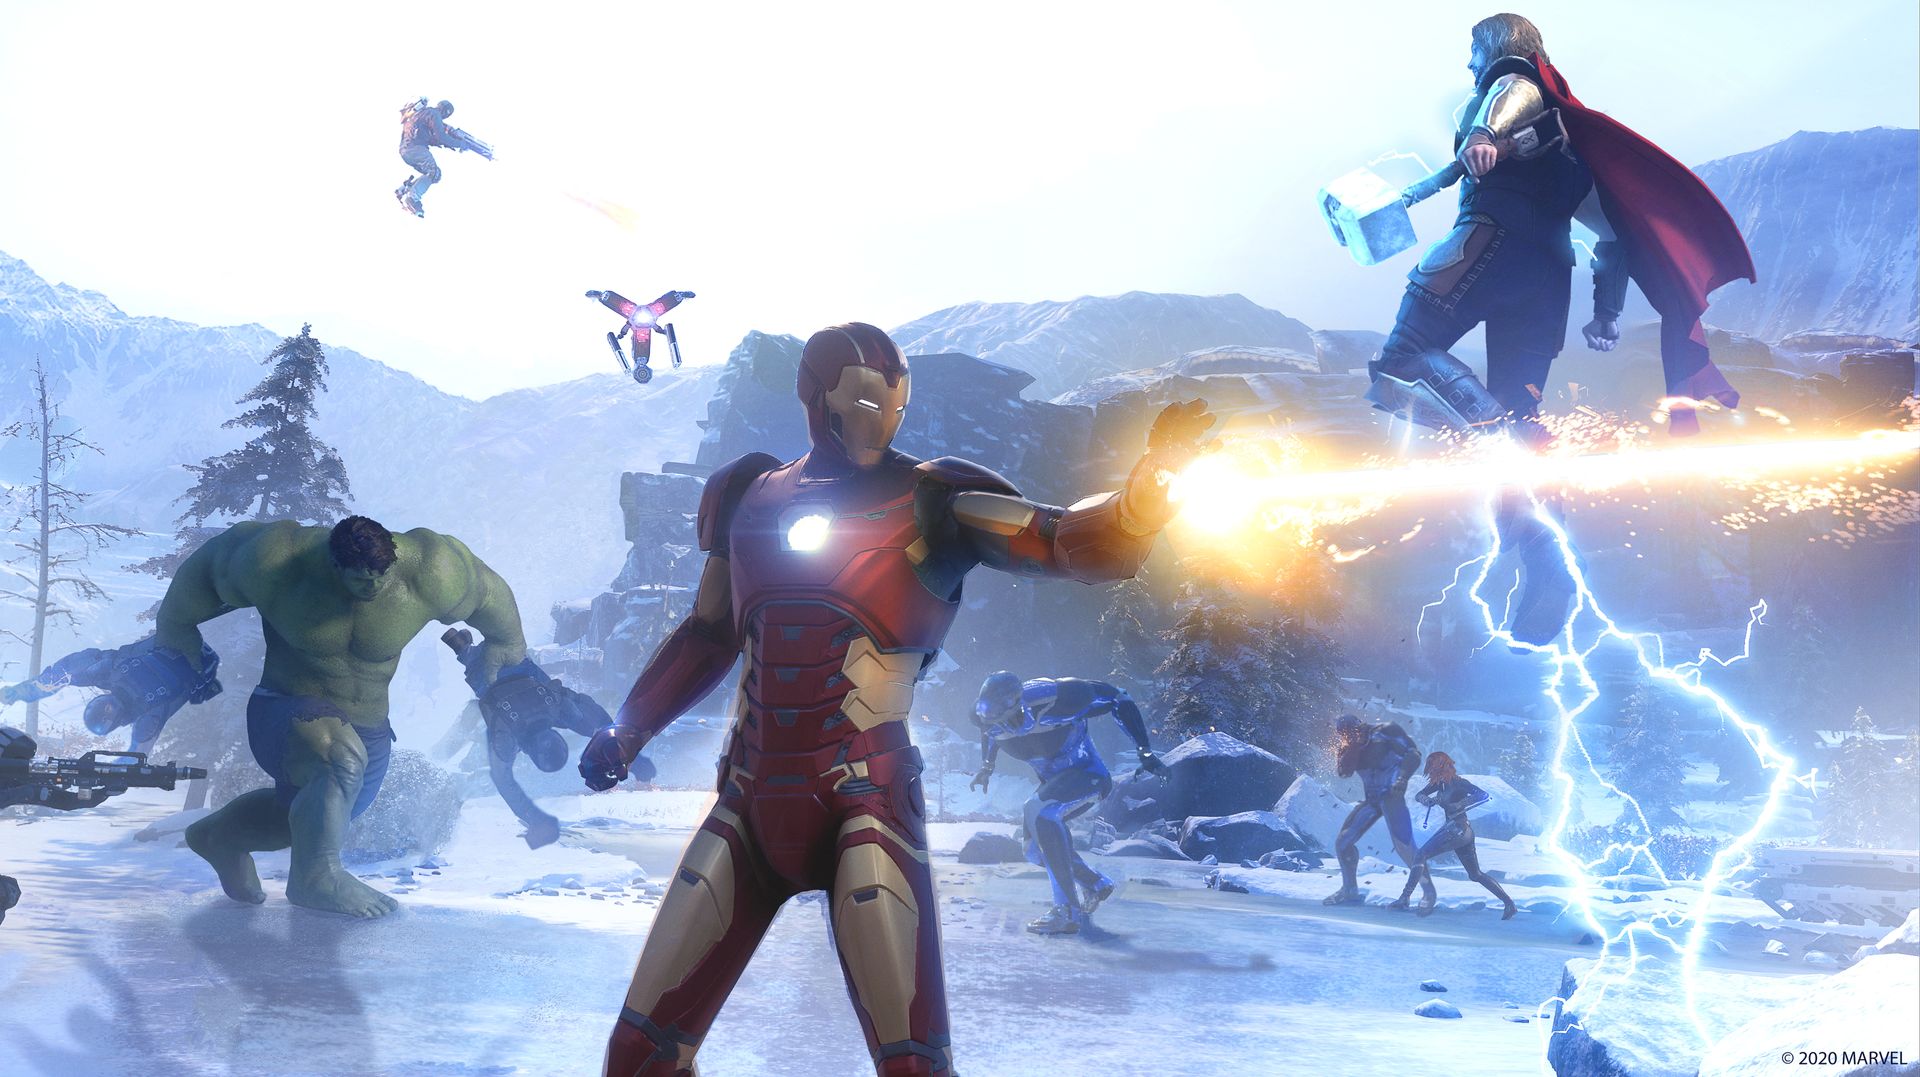 Marvel's Avengers game finally looks like something we want to play